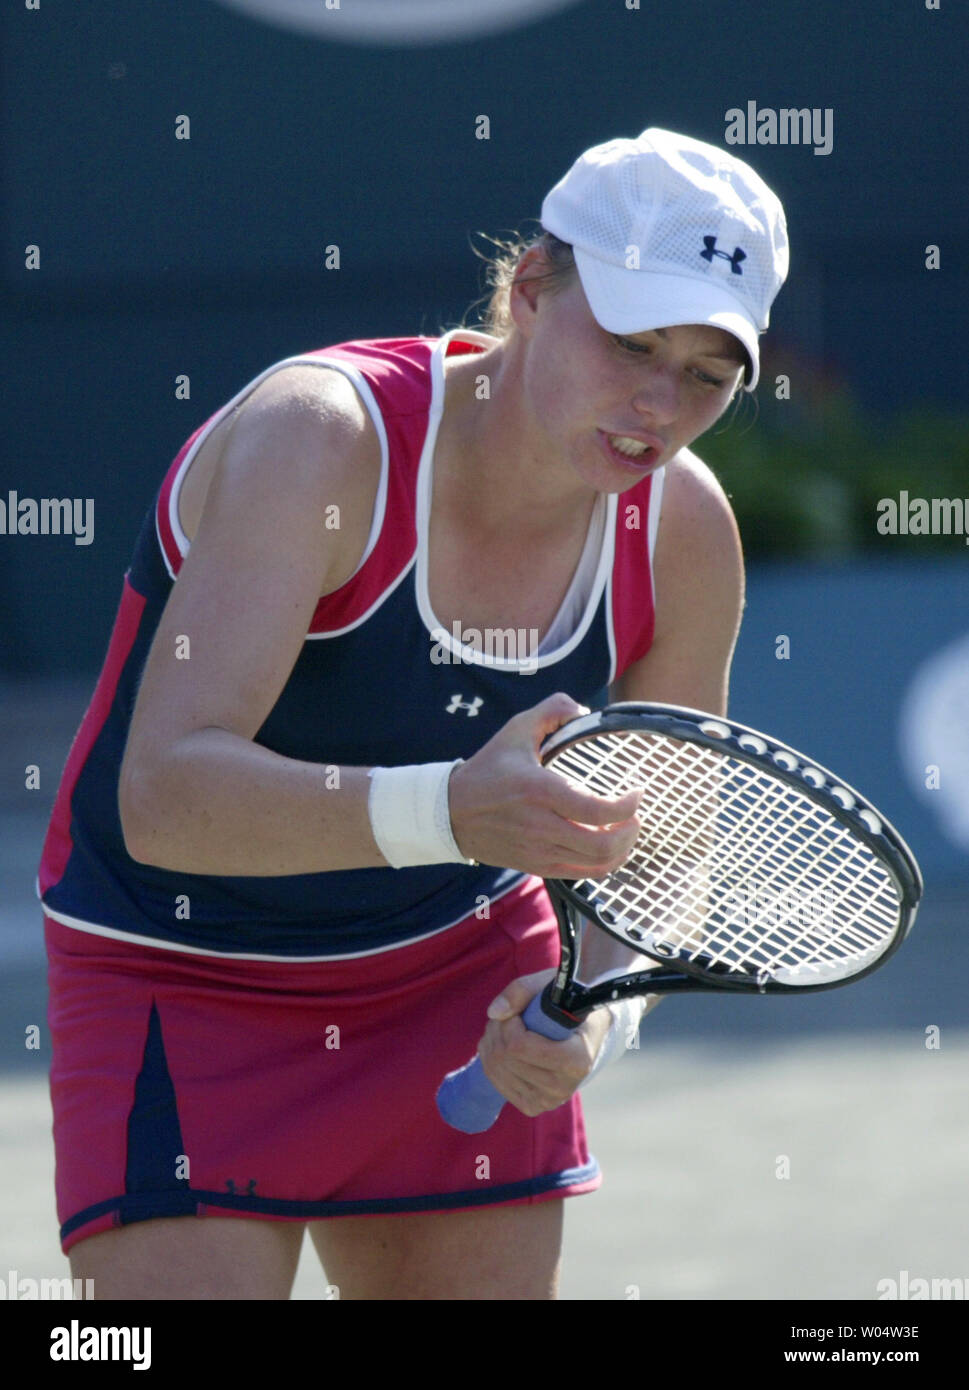 Vera Zvonareva of Russia shows her frustration after a lost point against Michaella Krajicek of the Netherlands in the quarterfinals of the Family Circle Cup tennis tournament in Charleston, South Carolina on April 13, 2007. Zvonareva won the match 6-1, 7-5. (UPI Photo/Nell Redmond) Stock Photo